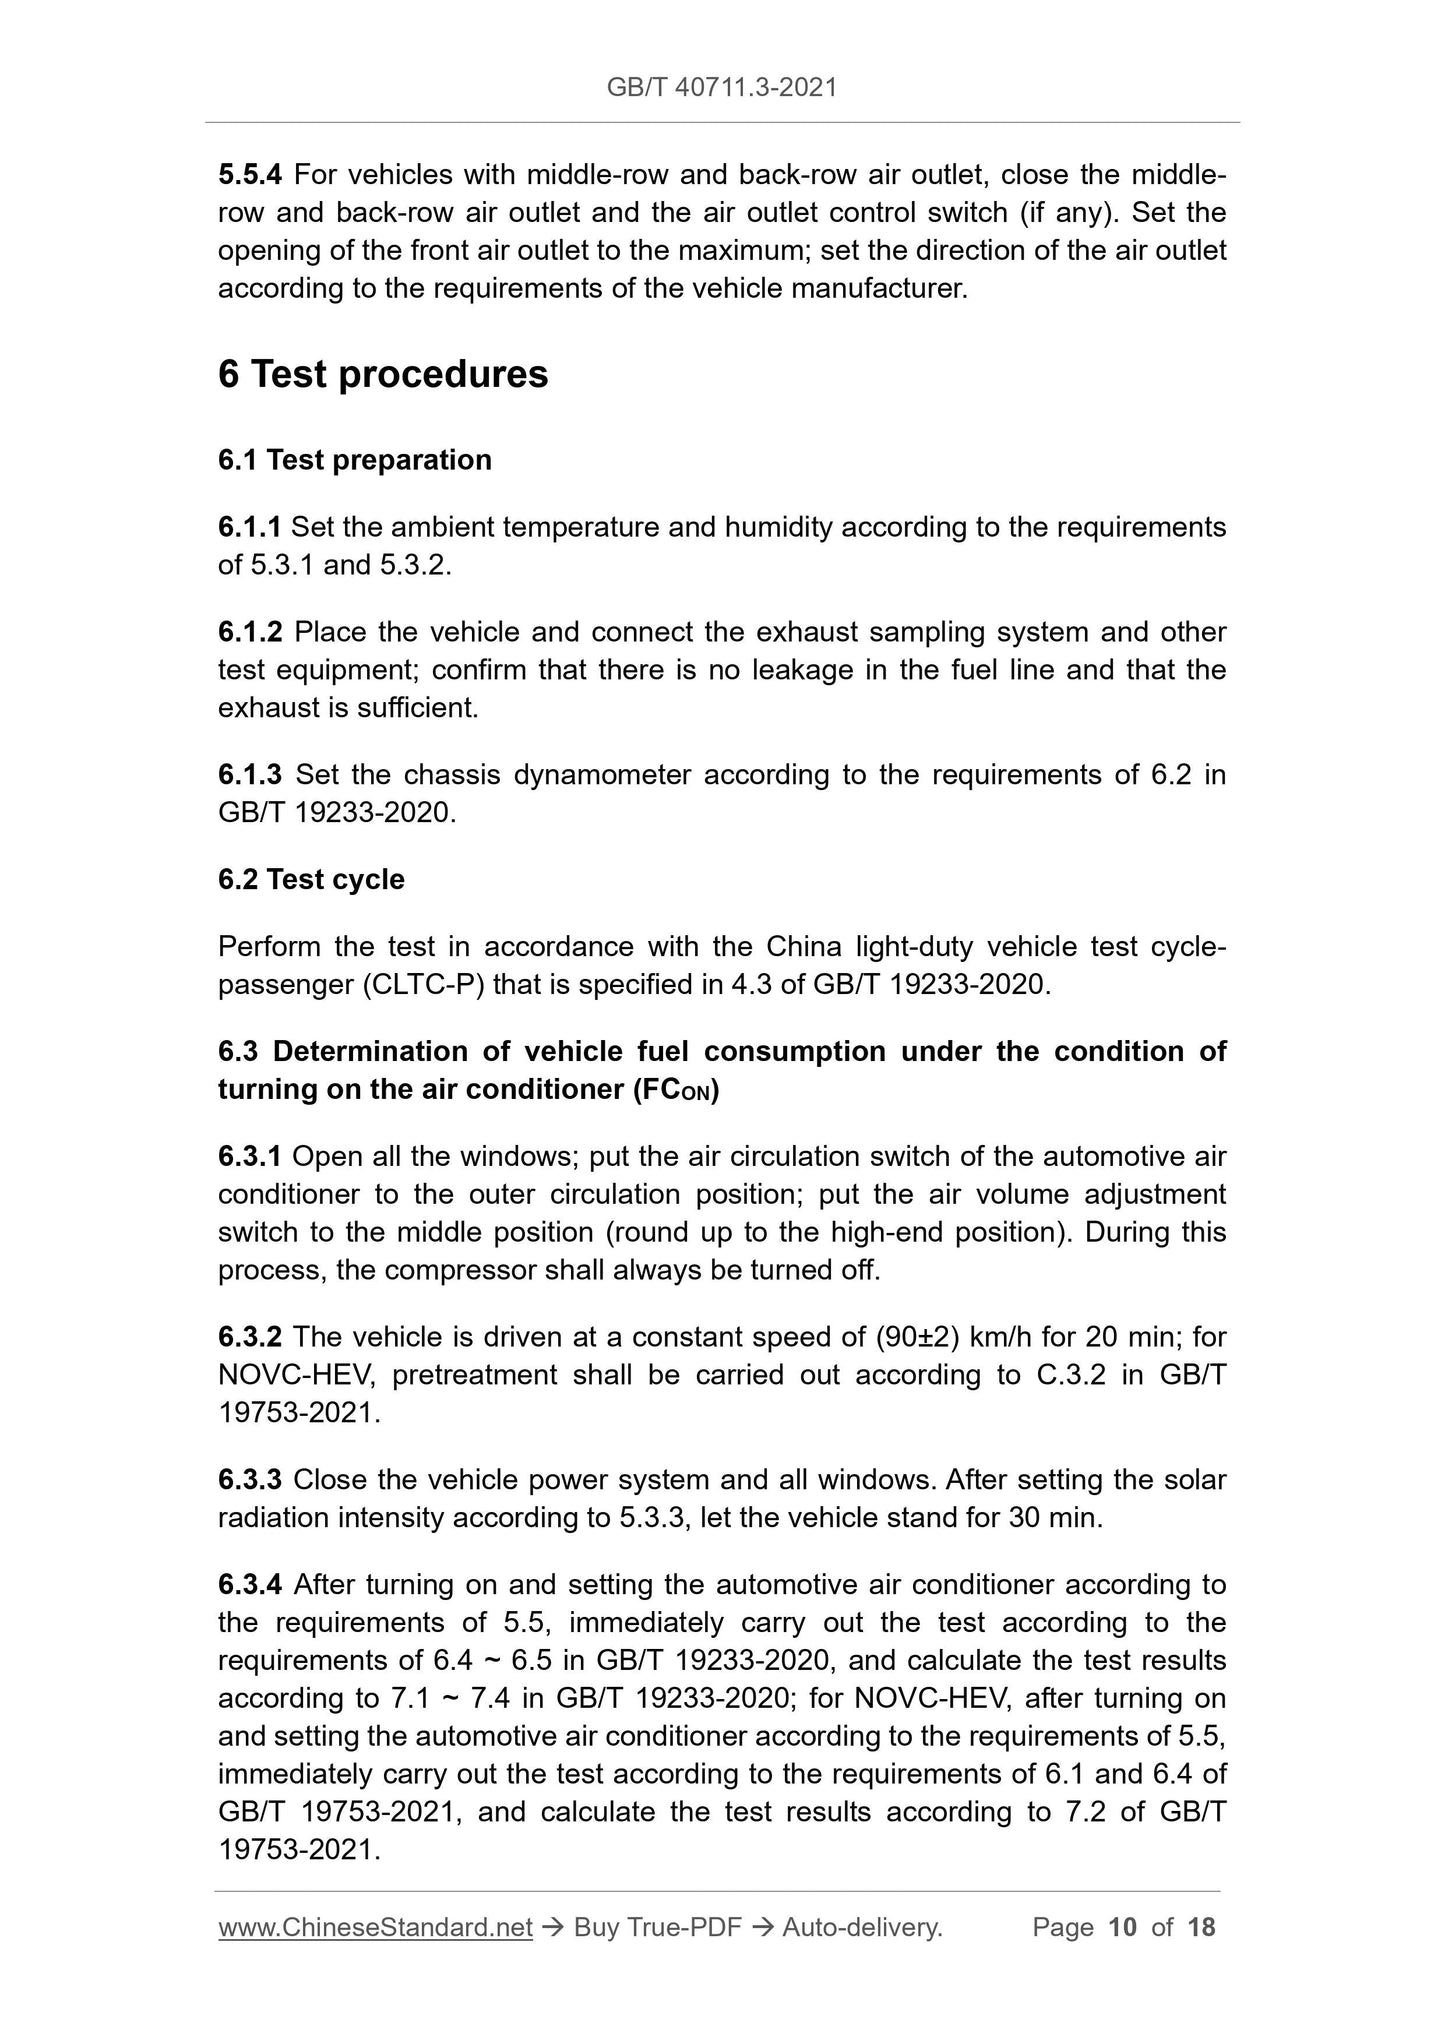 GB/T 40711.3-2021 Page 5